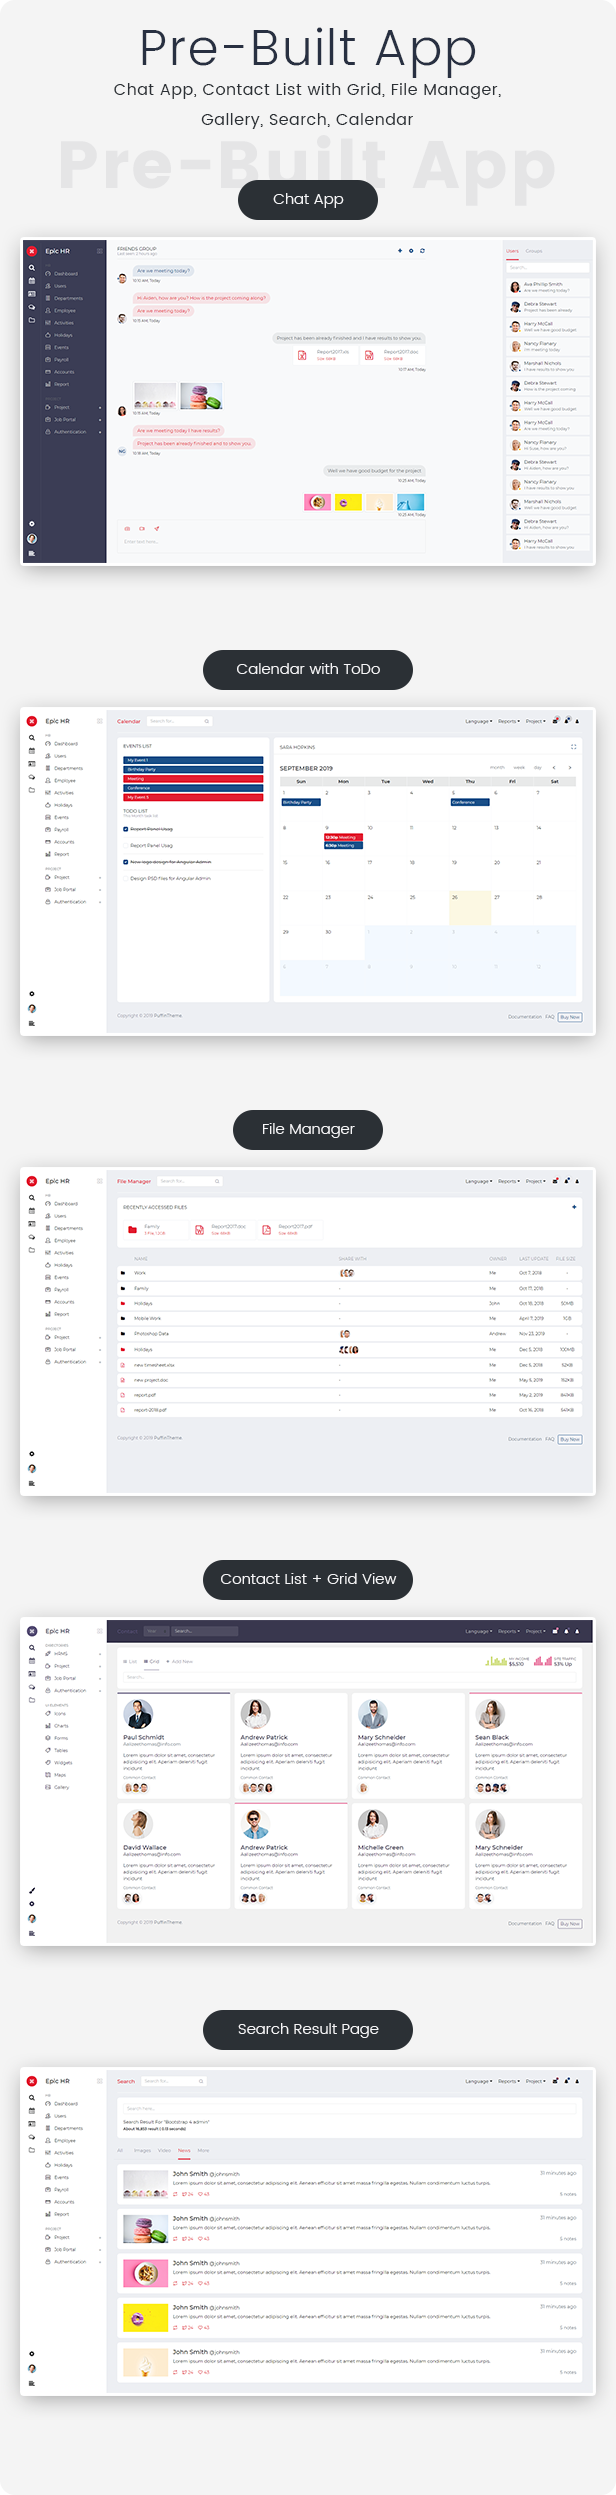 Epic Pro - HR & Project Management Admin Template and UI Kit - 7